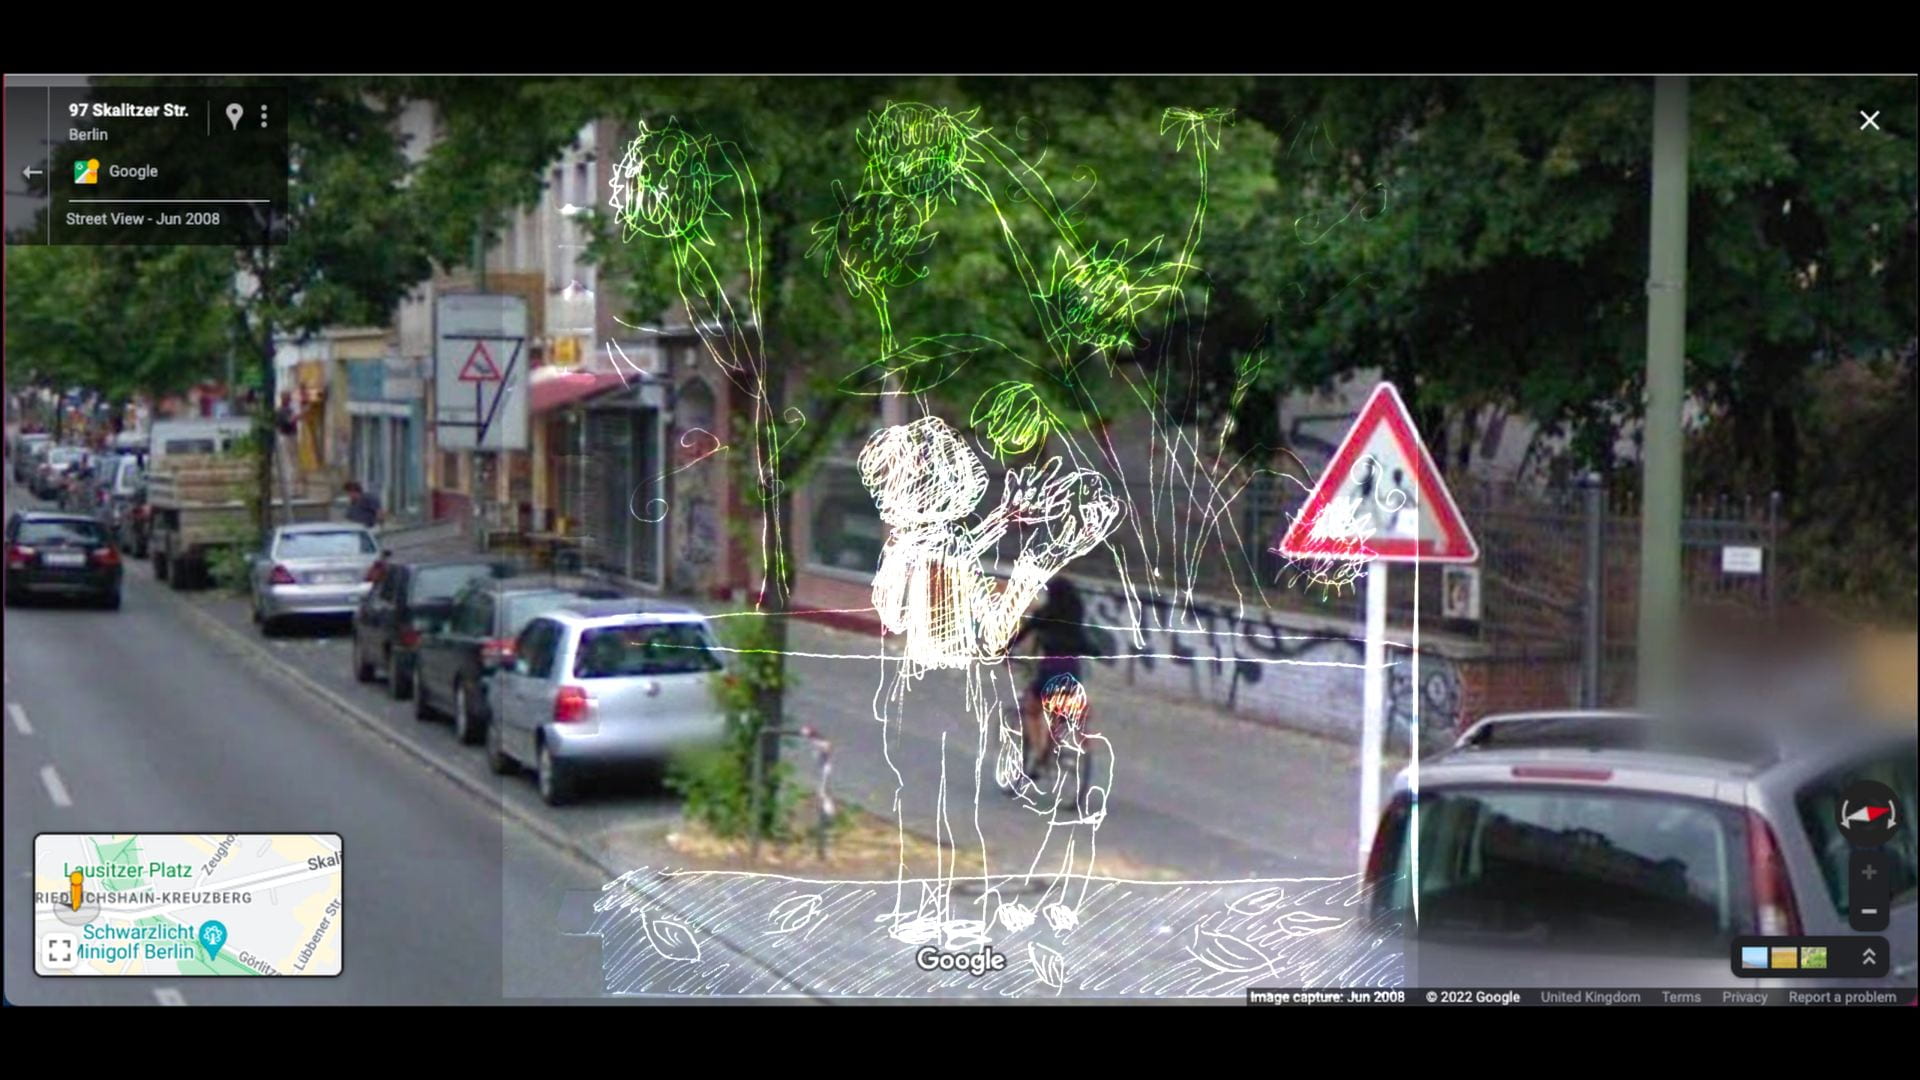 An image of a white drawing superimposed over a street scene.